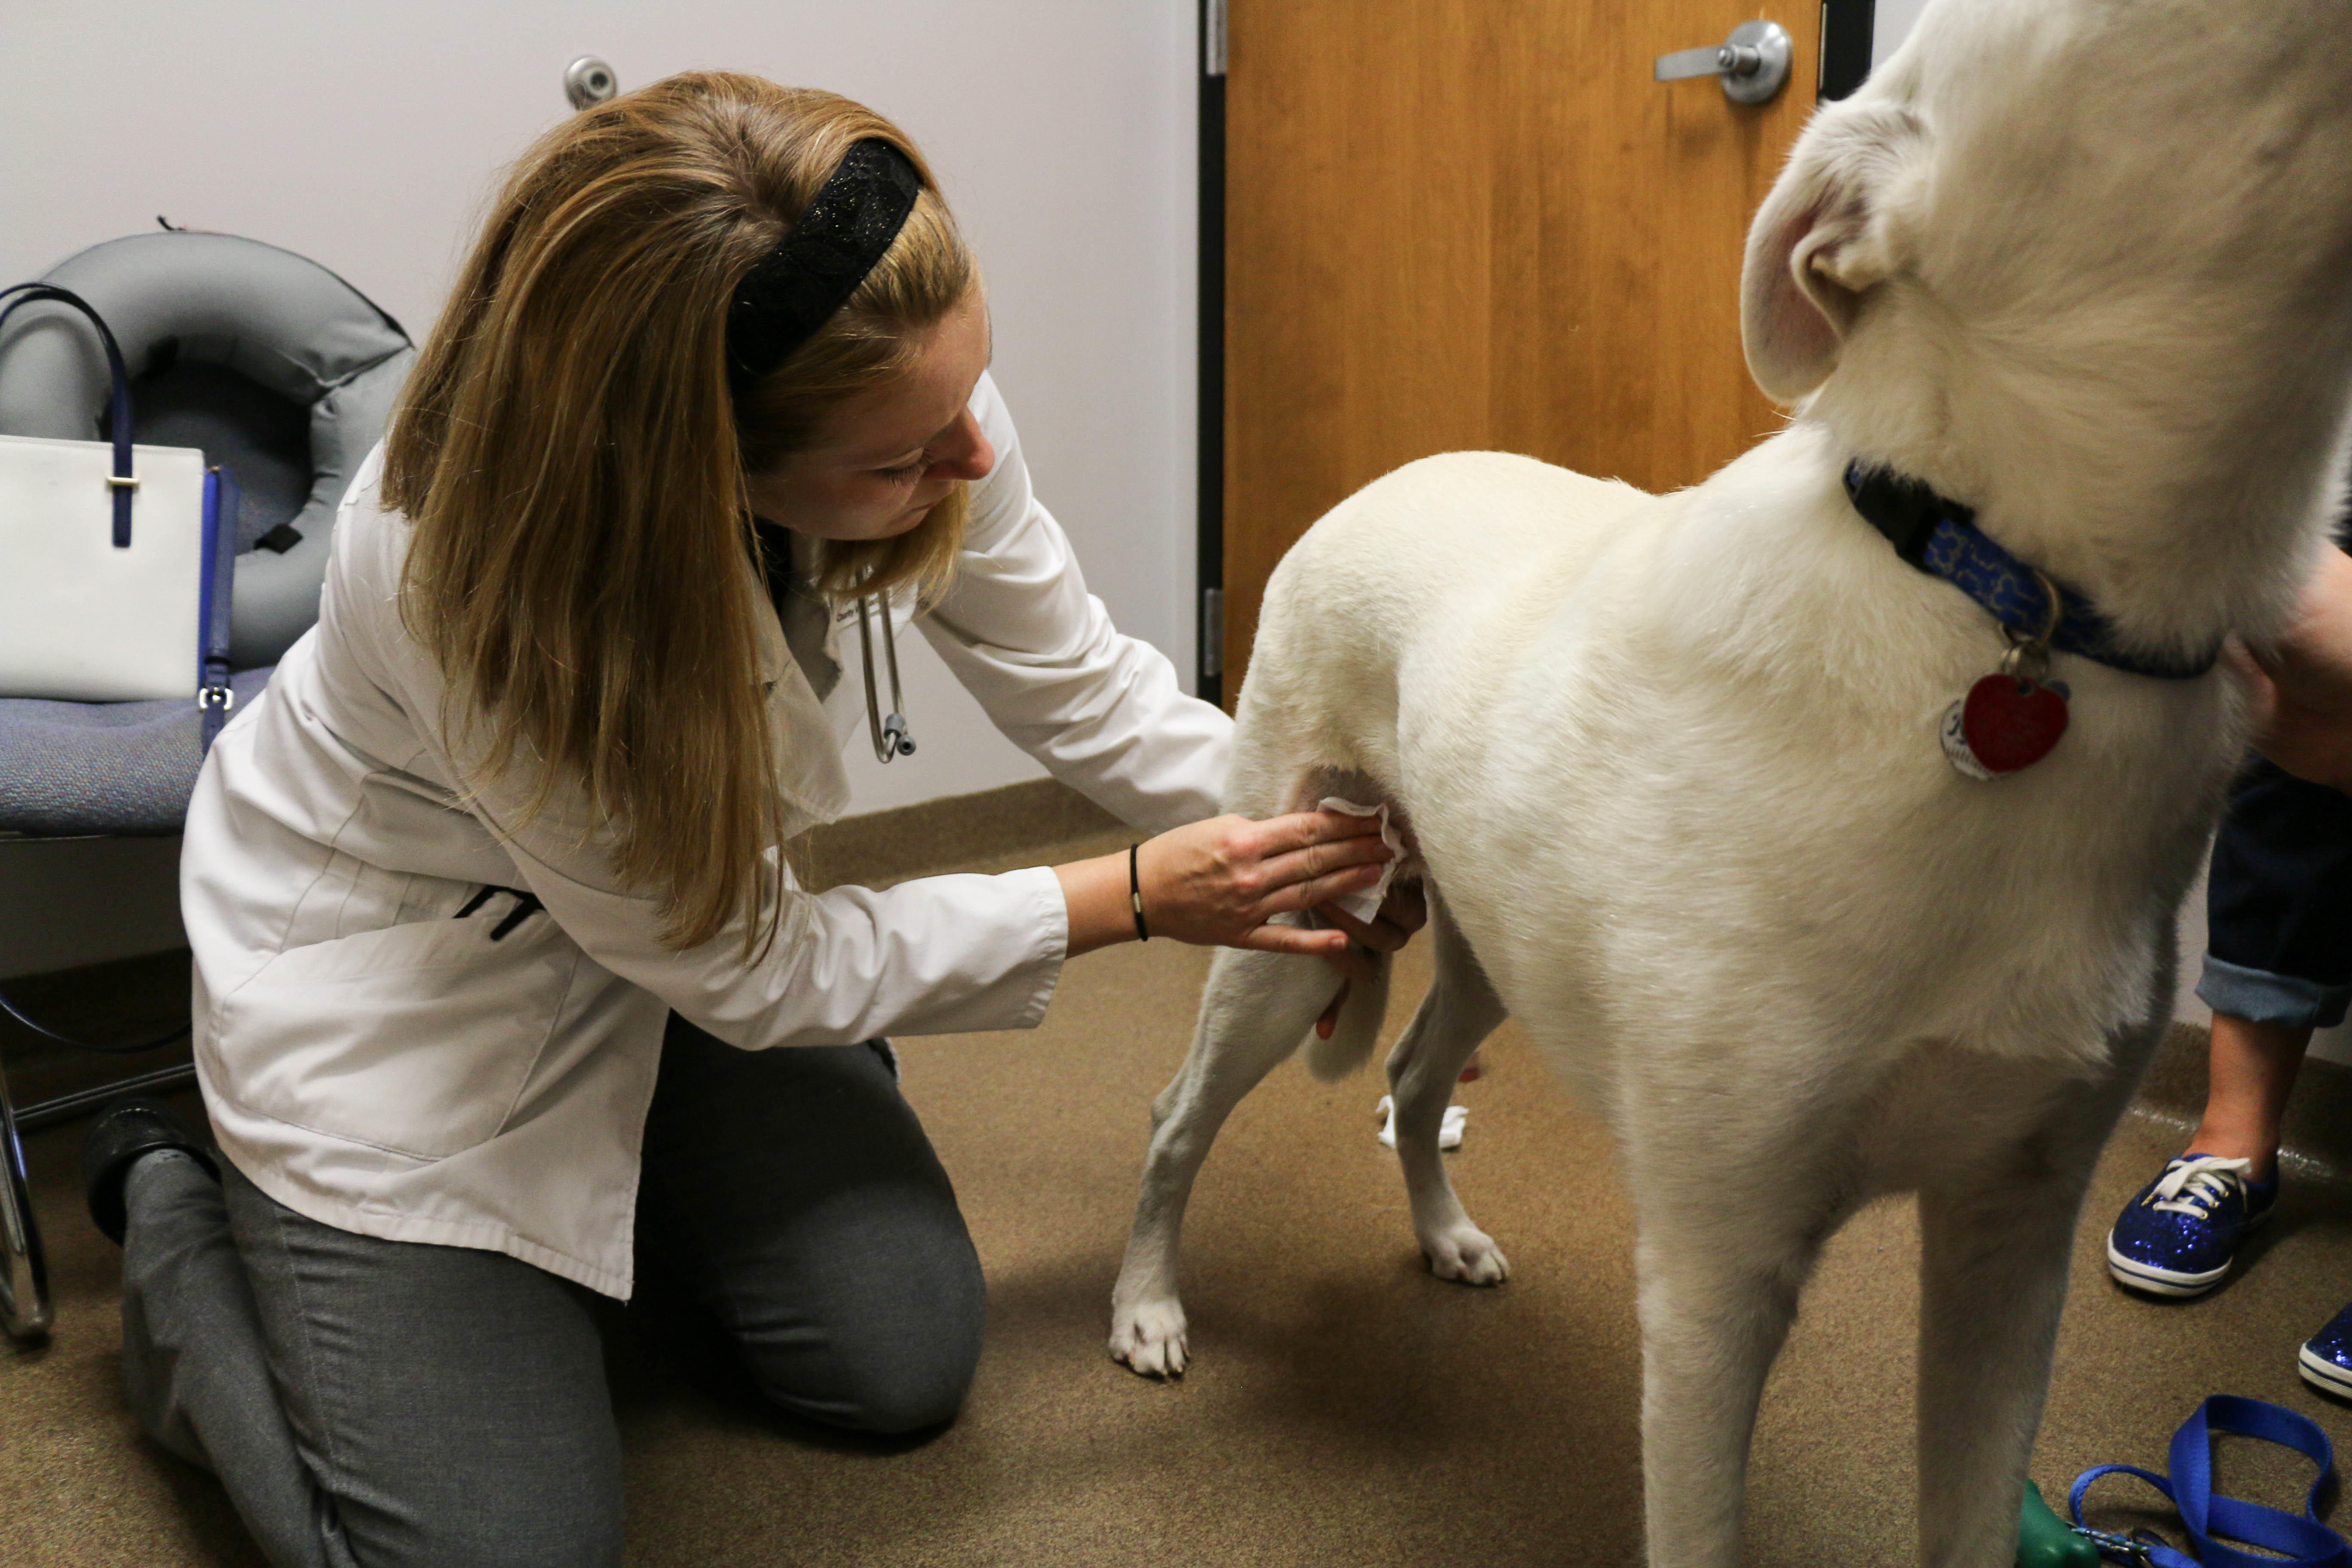 Dr. Vuagniaux is treating this patient’s hot spot. In veterinary medicine, a hot spot is a skin lesi AniMed Animal Hospital Blue Springs (816)220-0222